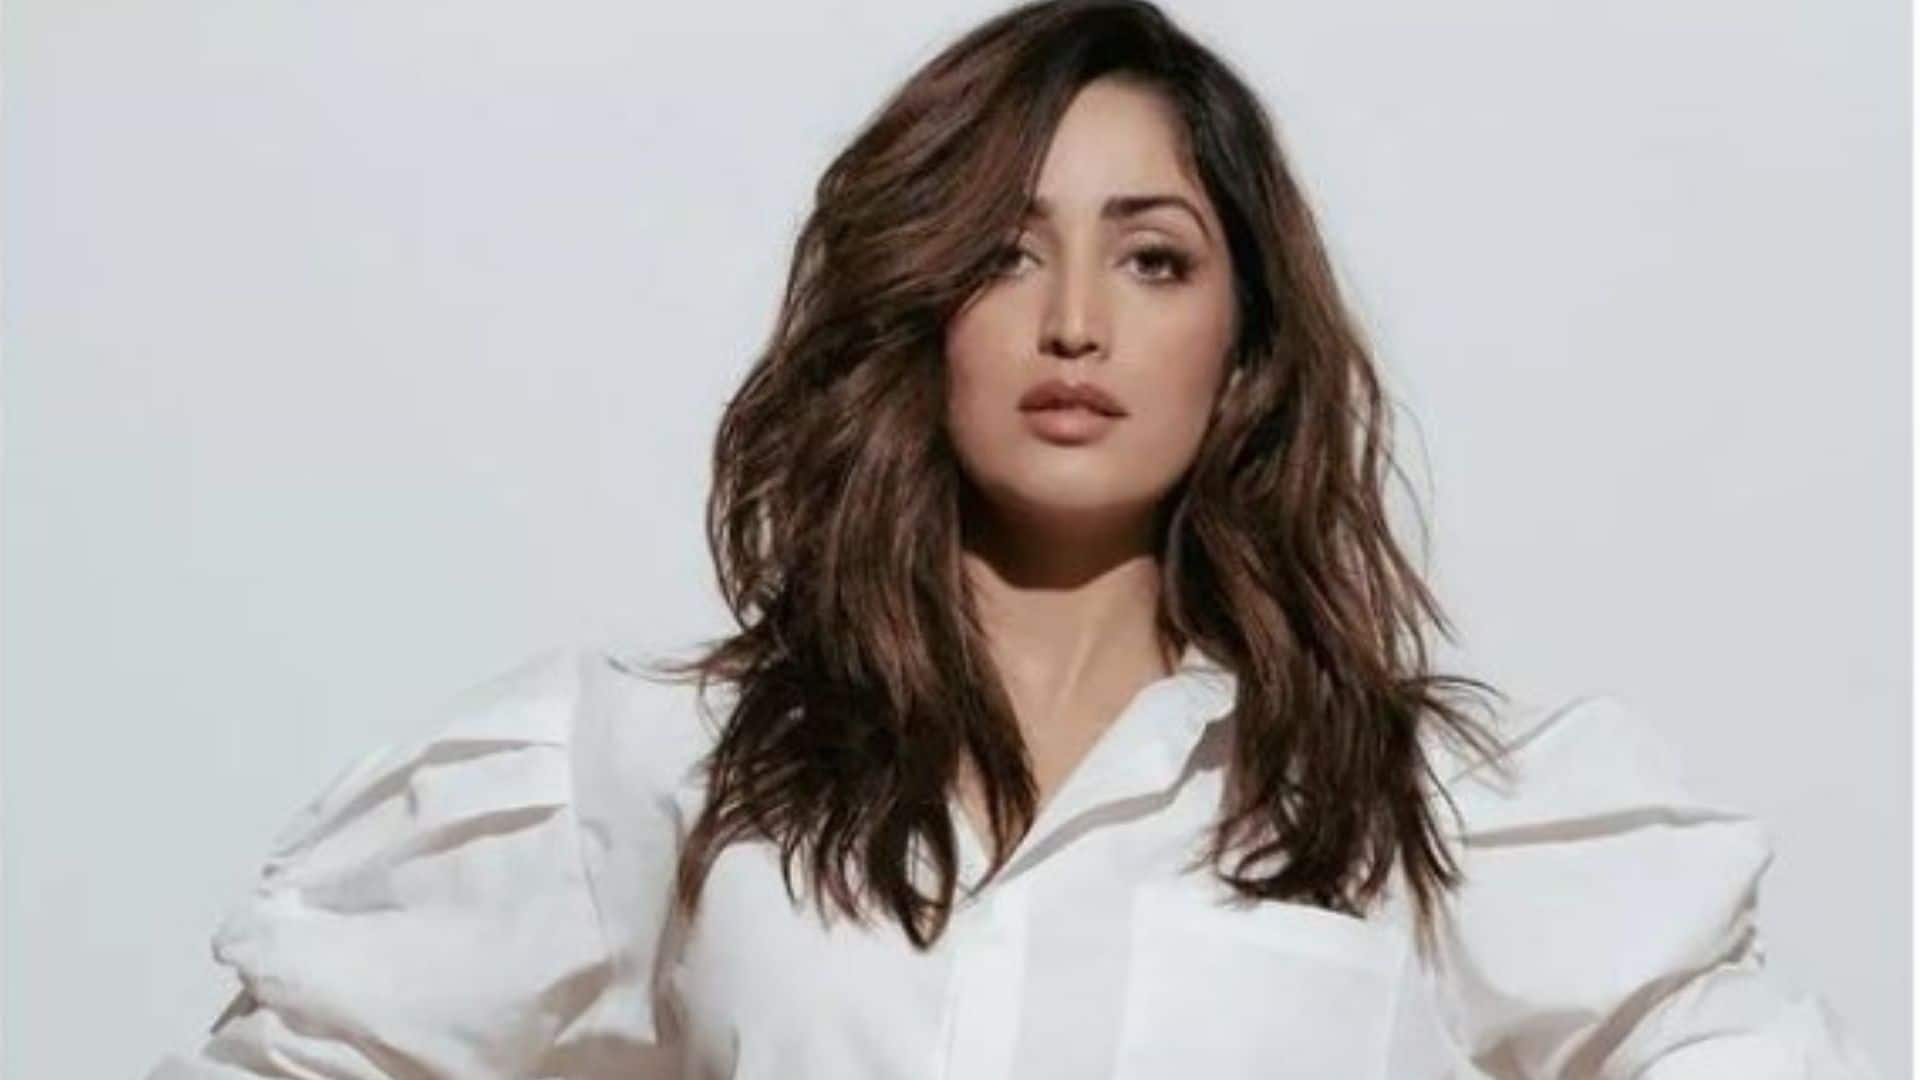 Yami Gautam shares a powerful open letter on Women's Day, says ‘break shackles of misogyny’